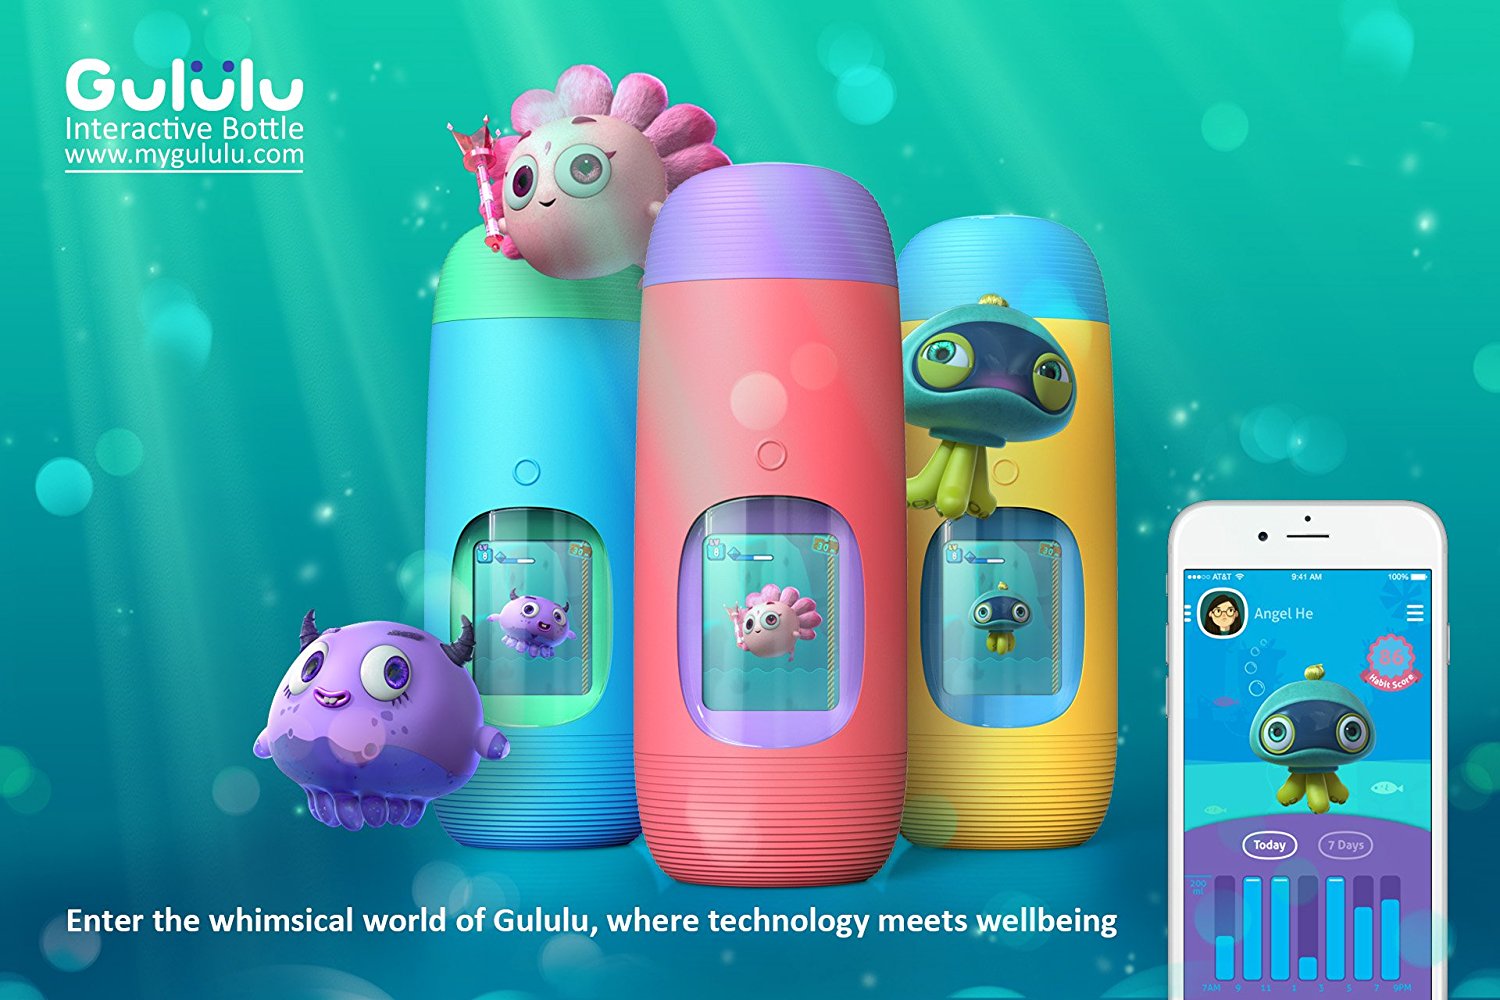 Keep your kids hydrated during summer with Gululu